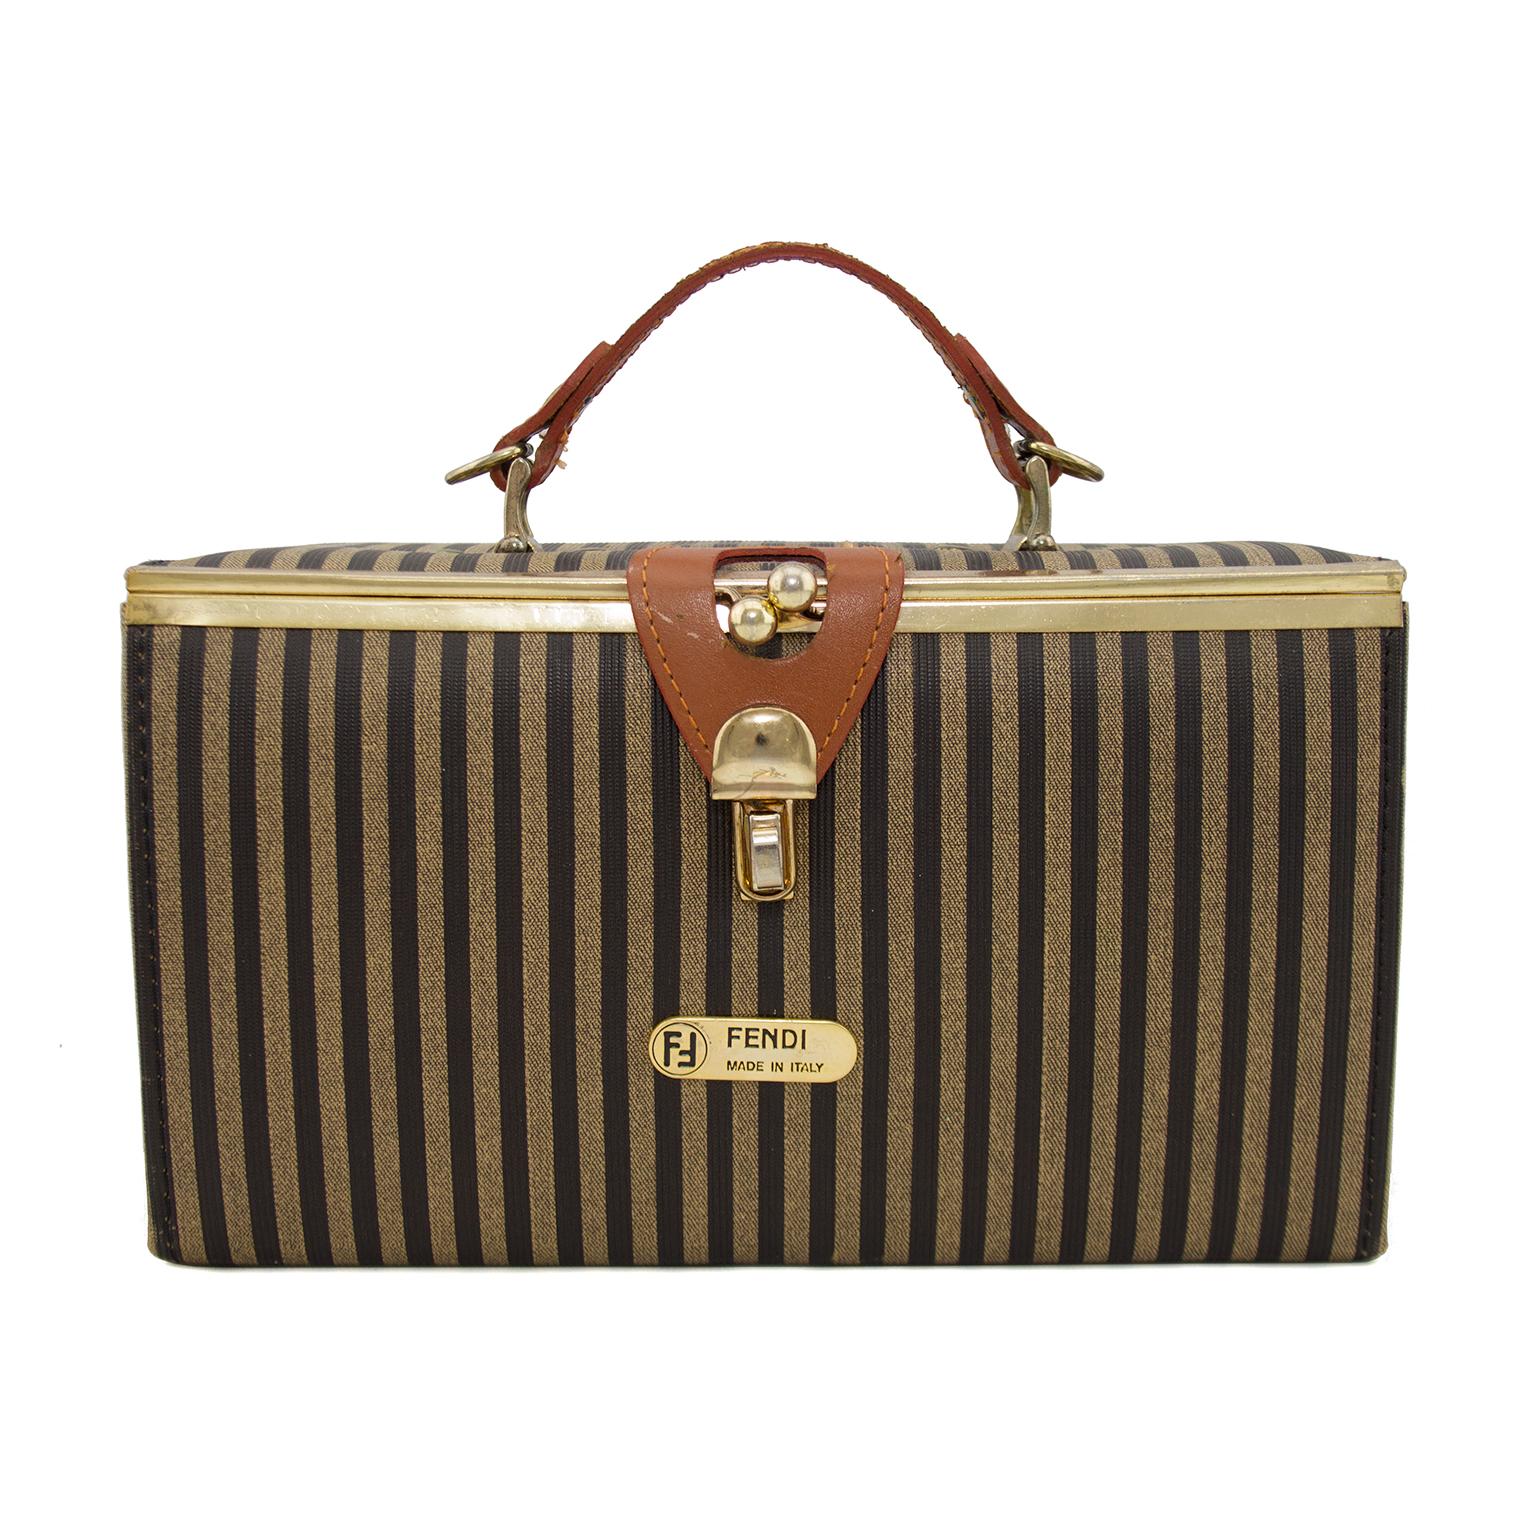 1980s Fendi Zucca striped rectangular 'Train Bag' with top handle and shoulder strap. The fresh and clean interior is lined in bright red corduroy with one interior side pocket and a large mirror on the underside of the top frame. Trimmed in gold